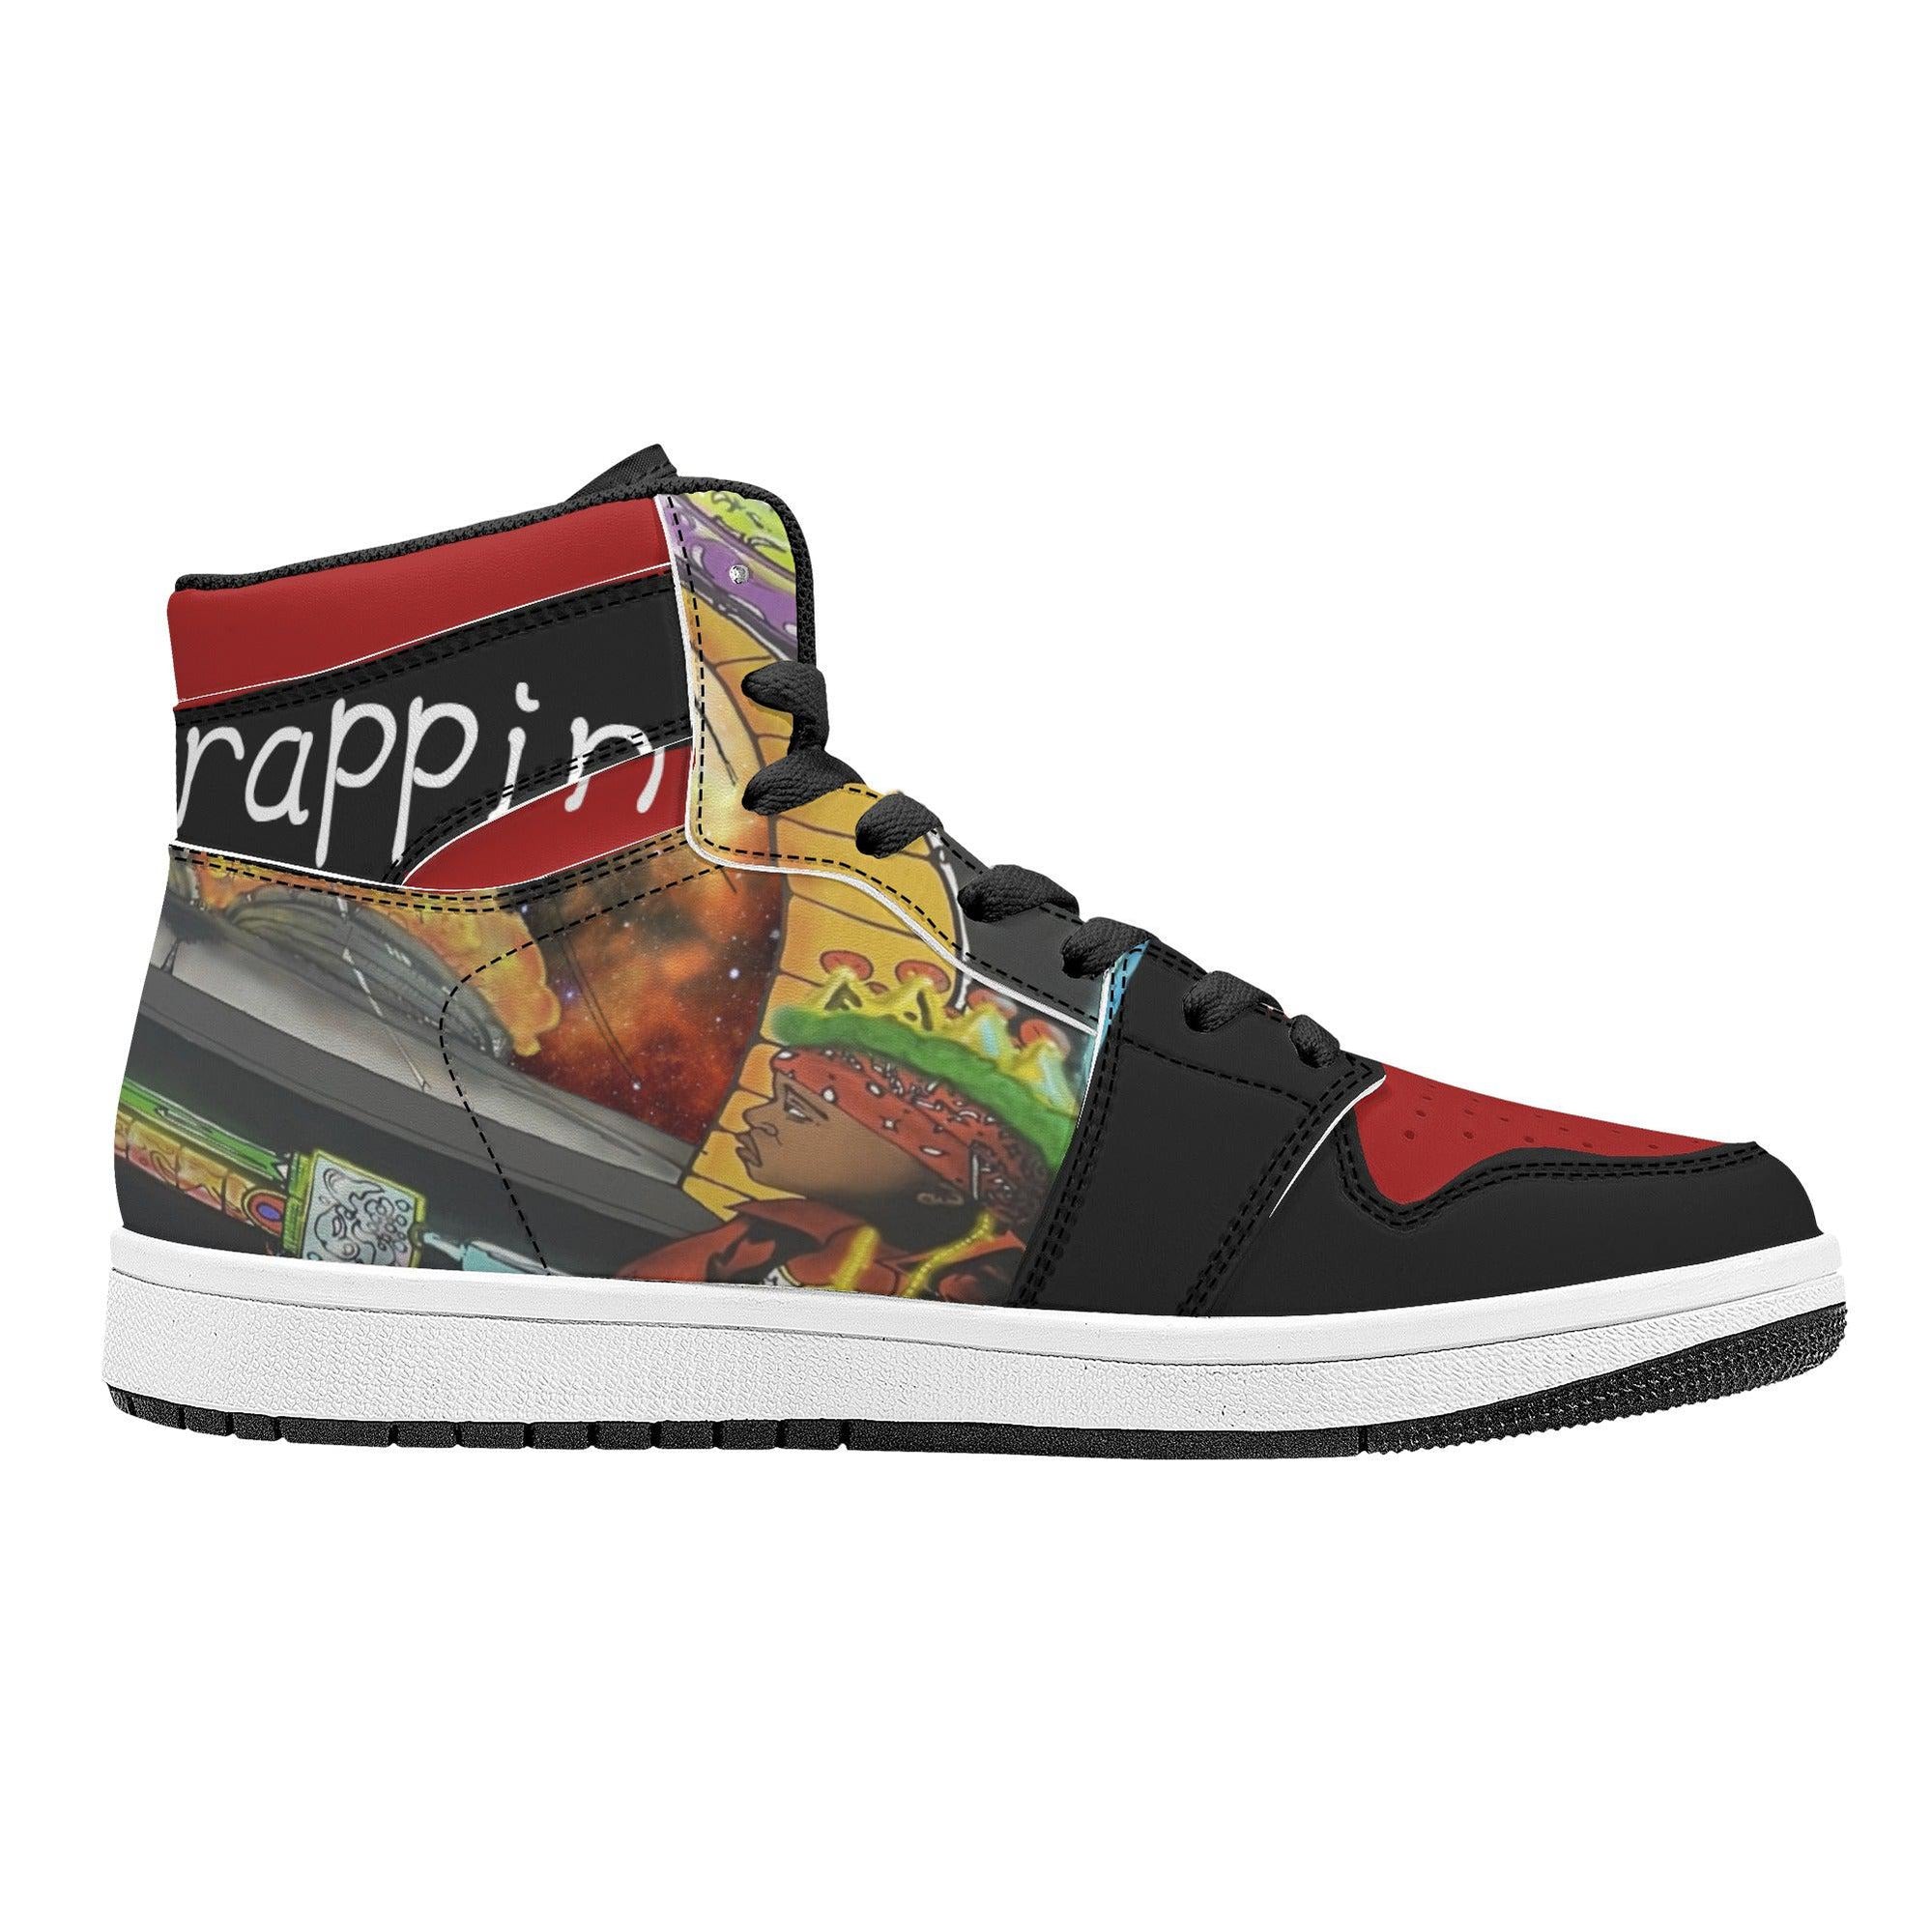 SpaceTrappin HighTop Leathers - Kanivee Customs